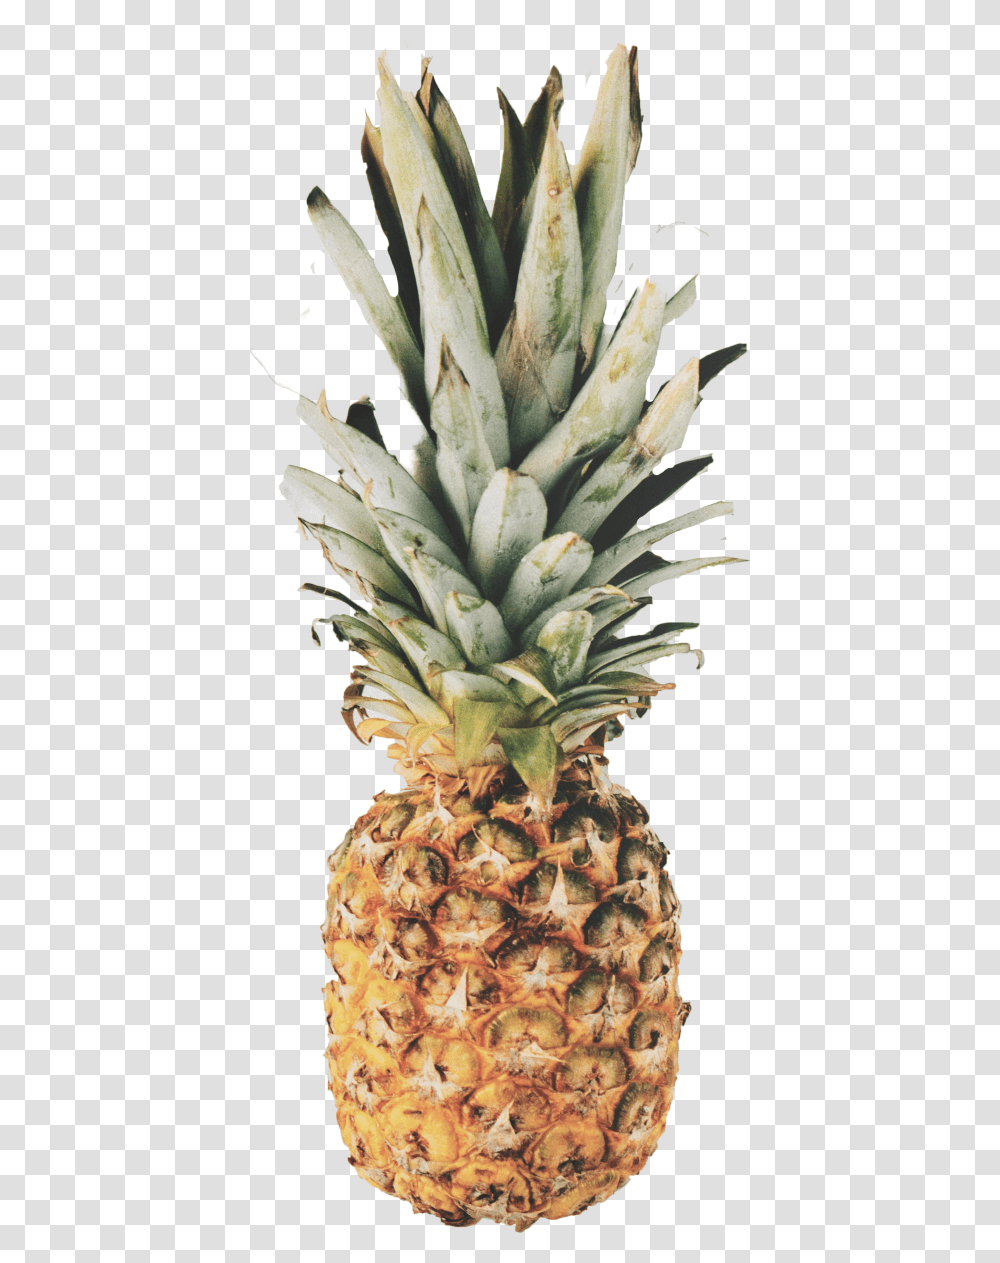 Pineapple Image Pineapple Wallpaper Quotes, Fruit, Plant, Food Transparent Png